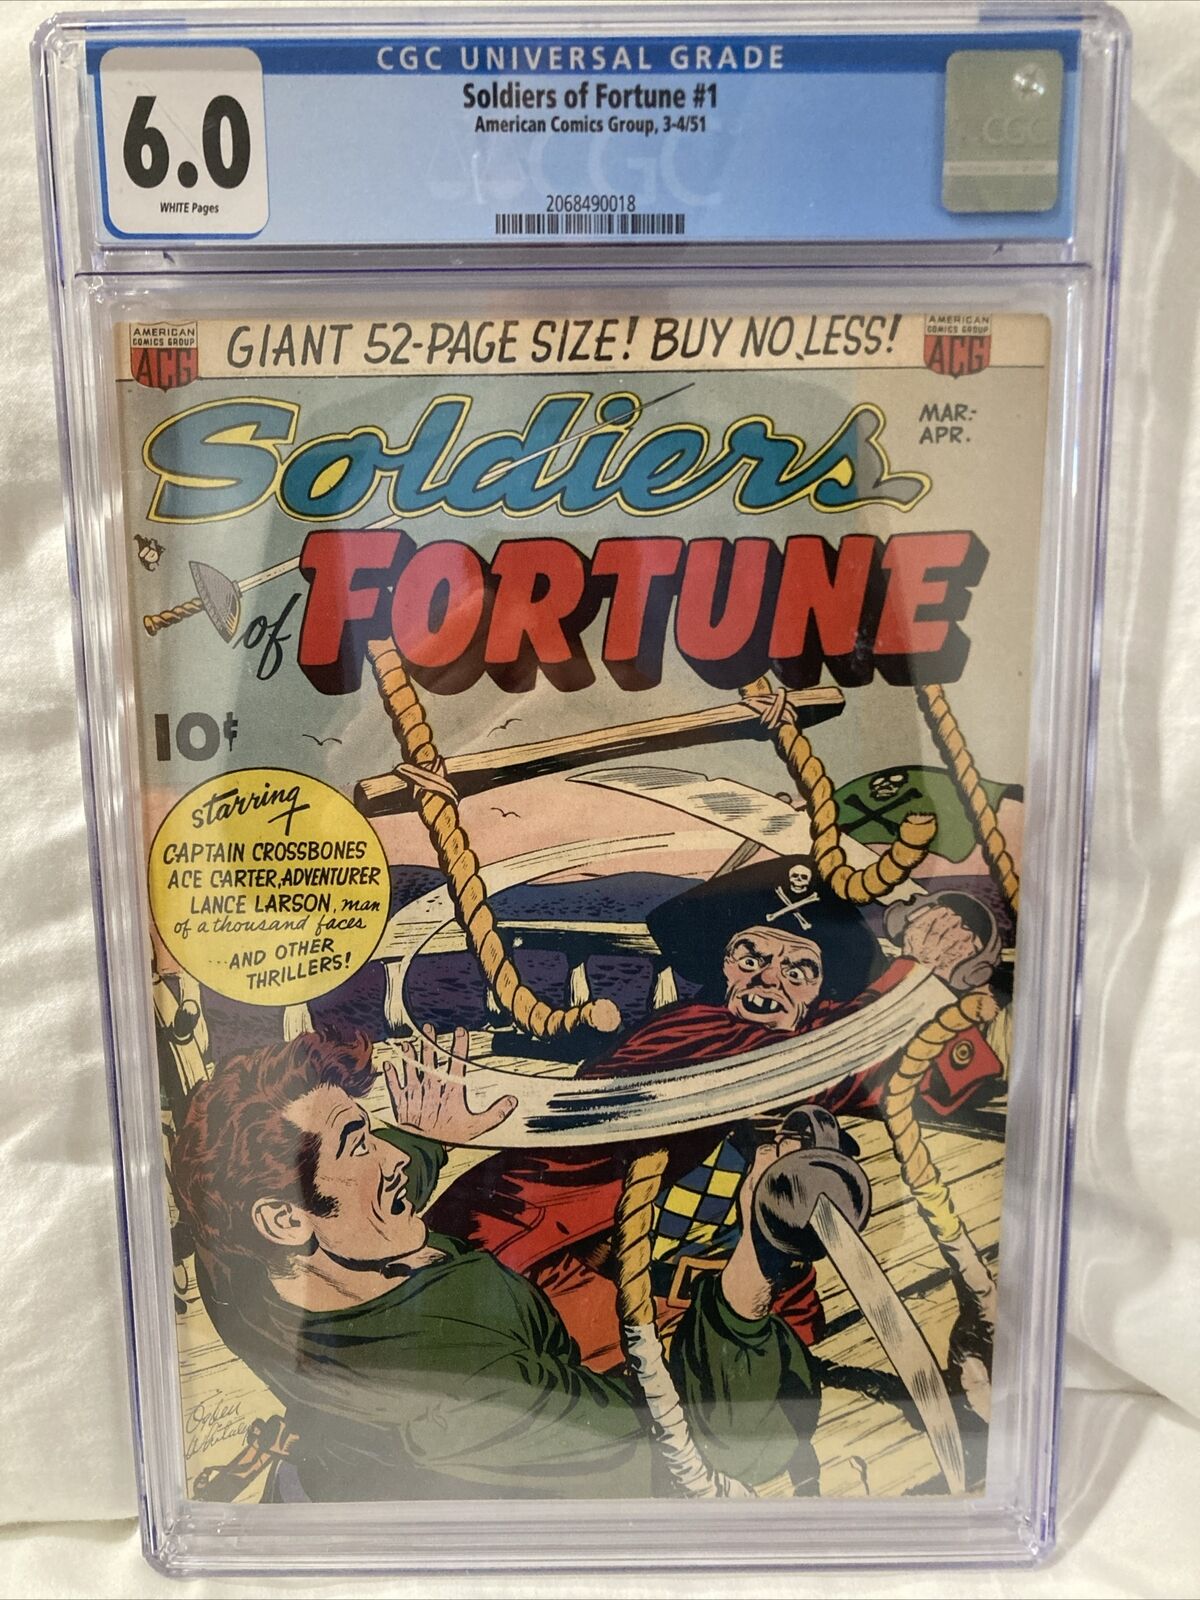 Soldiers Of Fortune #1 (March-April 1951, American Comics Group)CGC Graded (6.0)